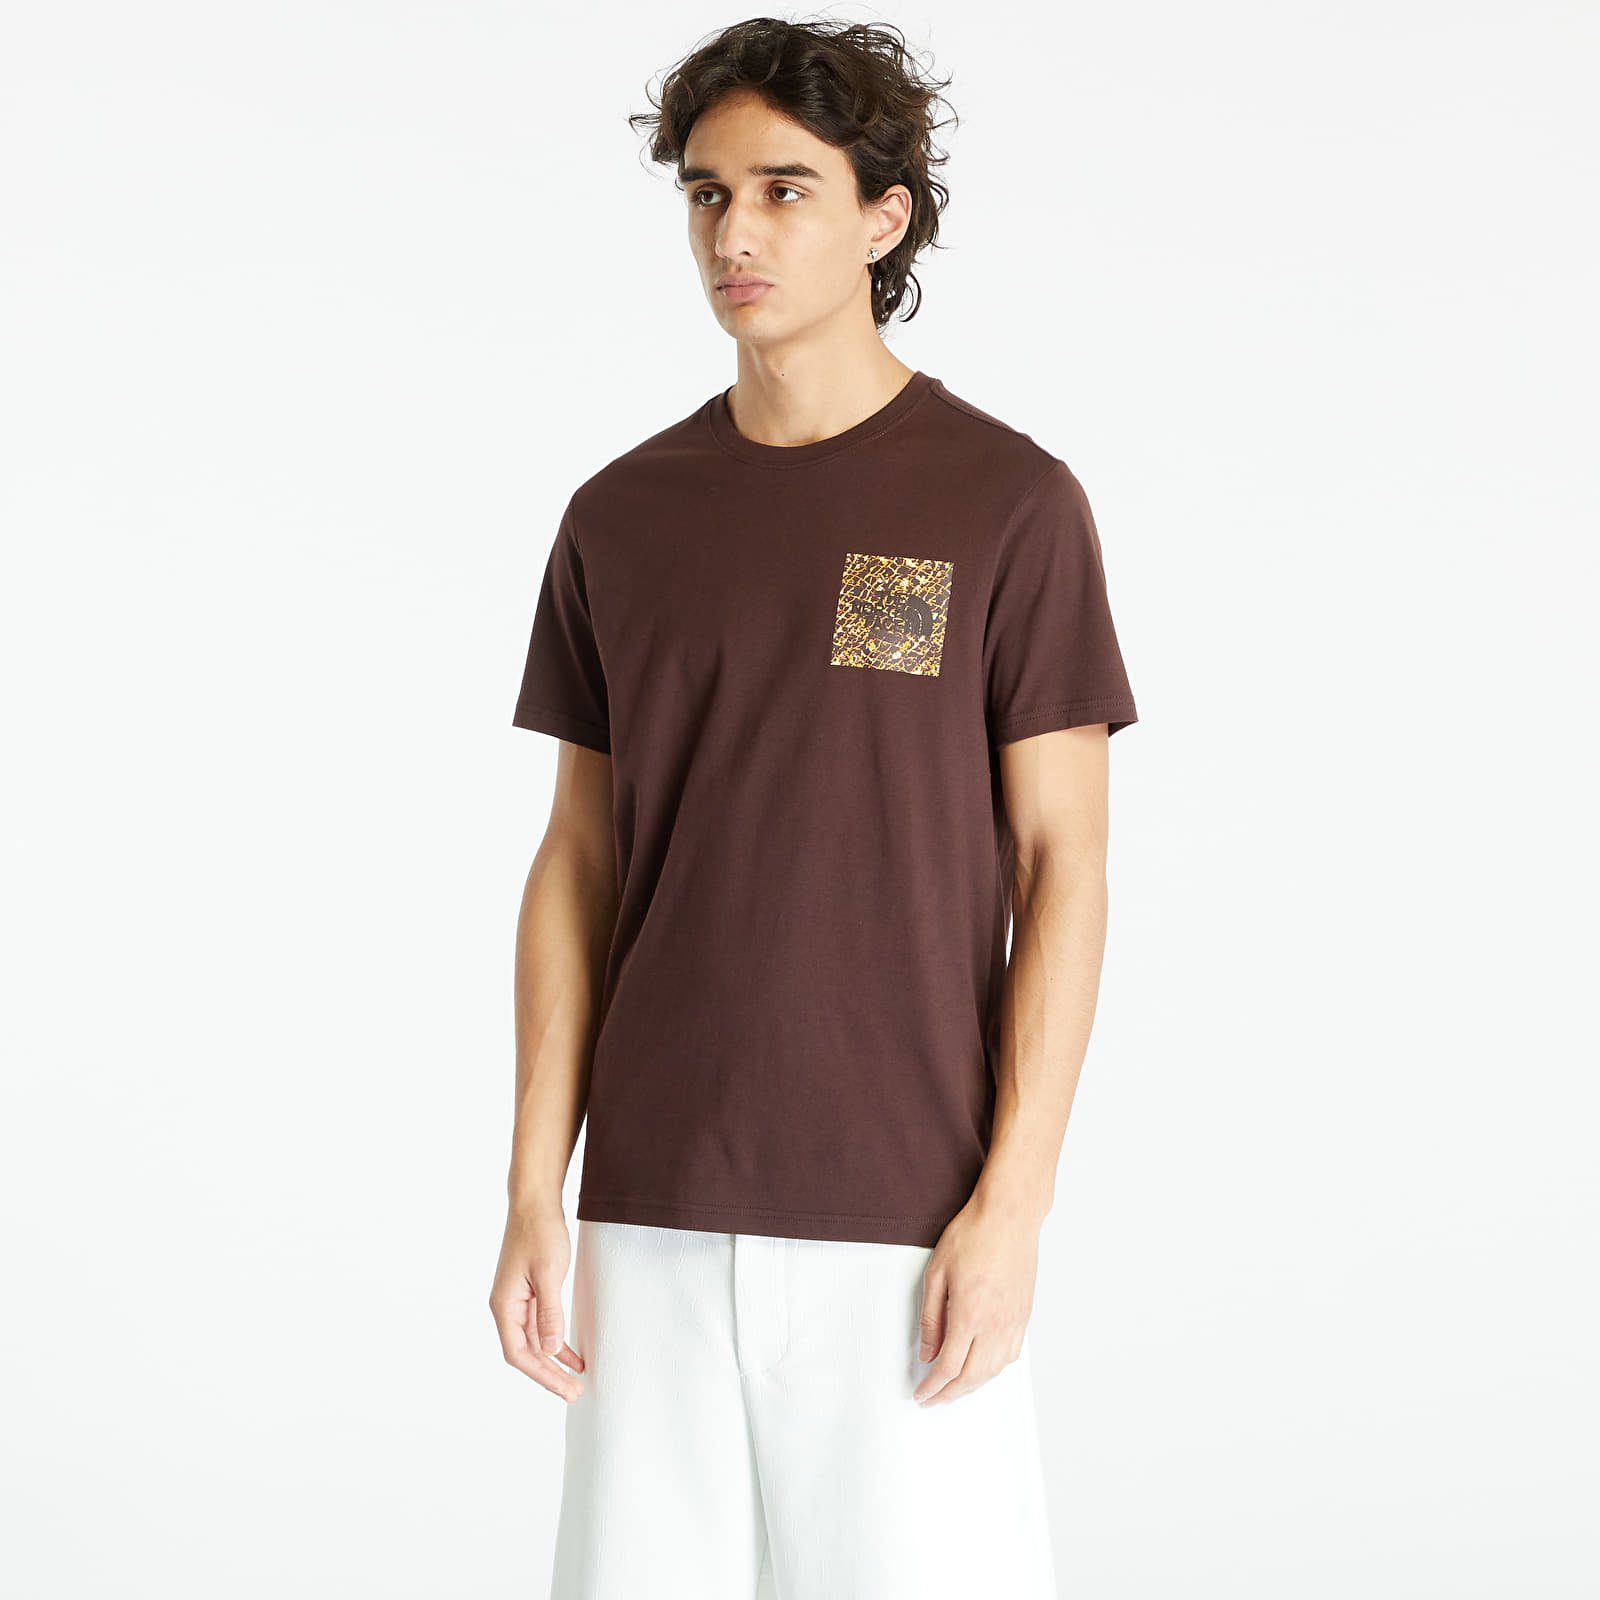 The North Face - s/s fine tee coal brown/ coal brown water distortion print